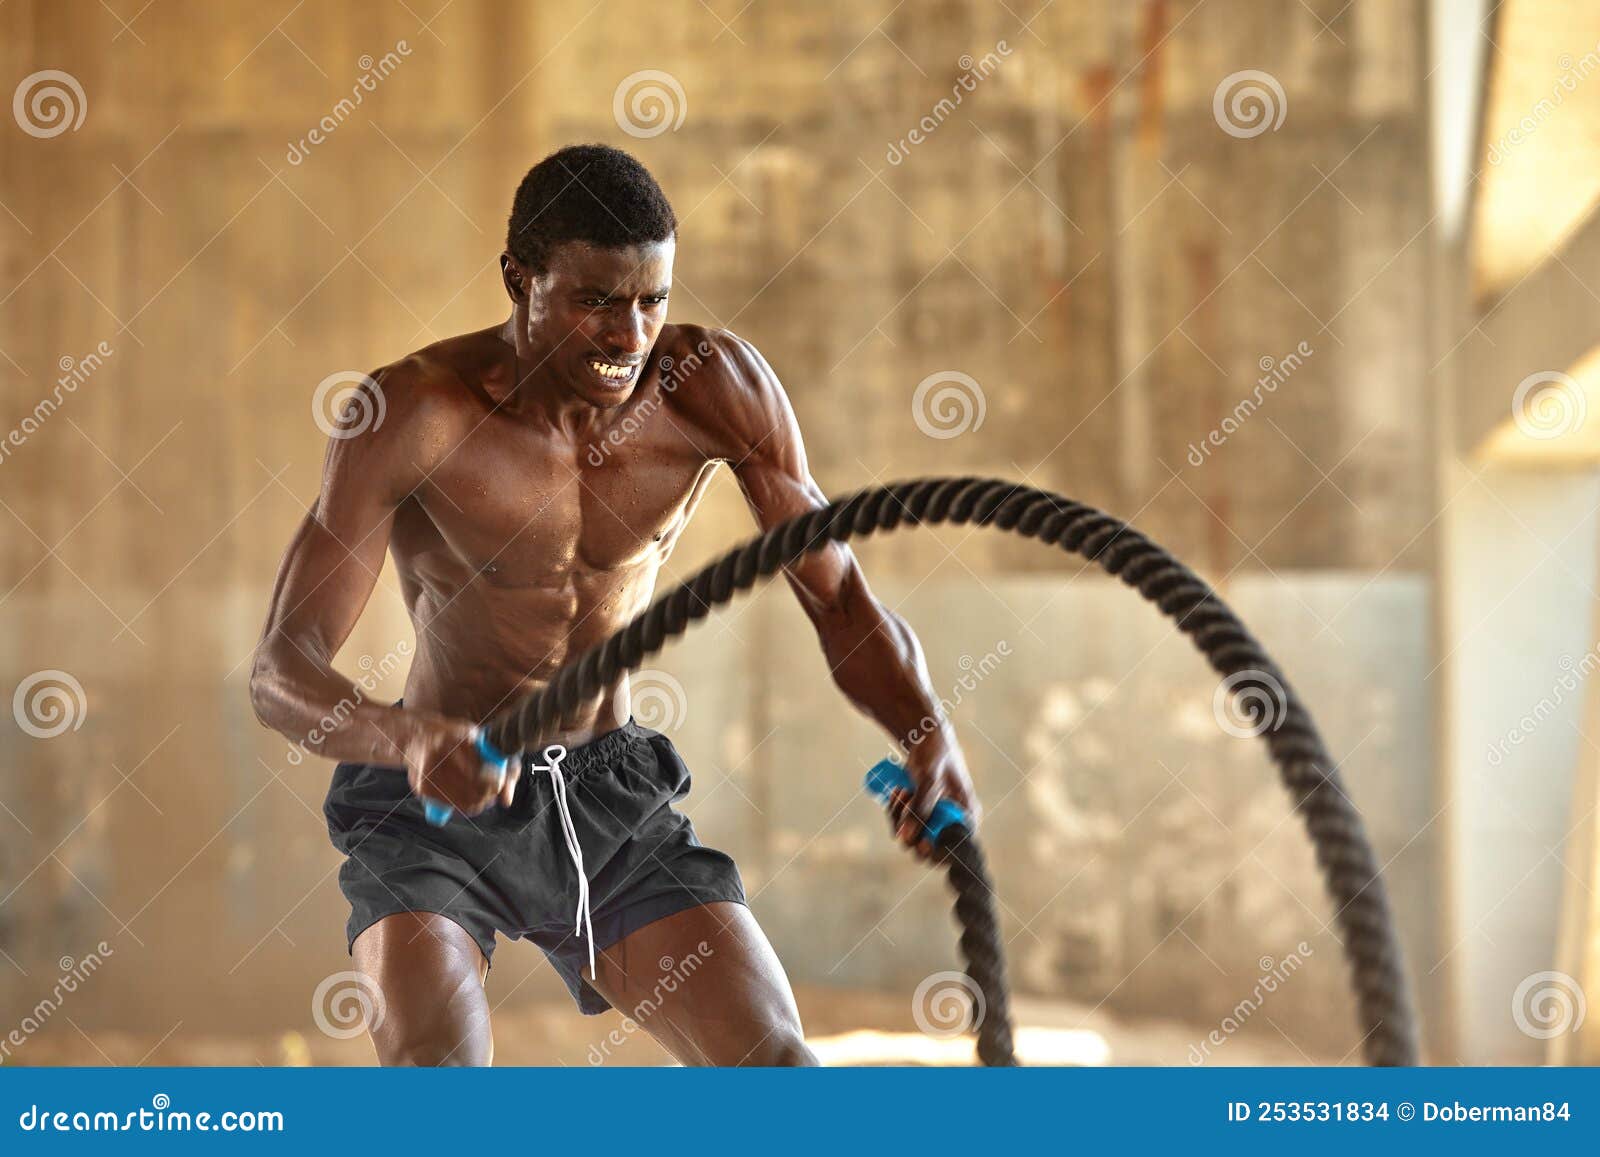 Rope Workout. Sport Man Doing Battle Ropes Exercise Outdoor Stock Photo -  Image of portrait, healthy: 253531834